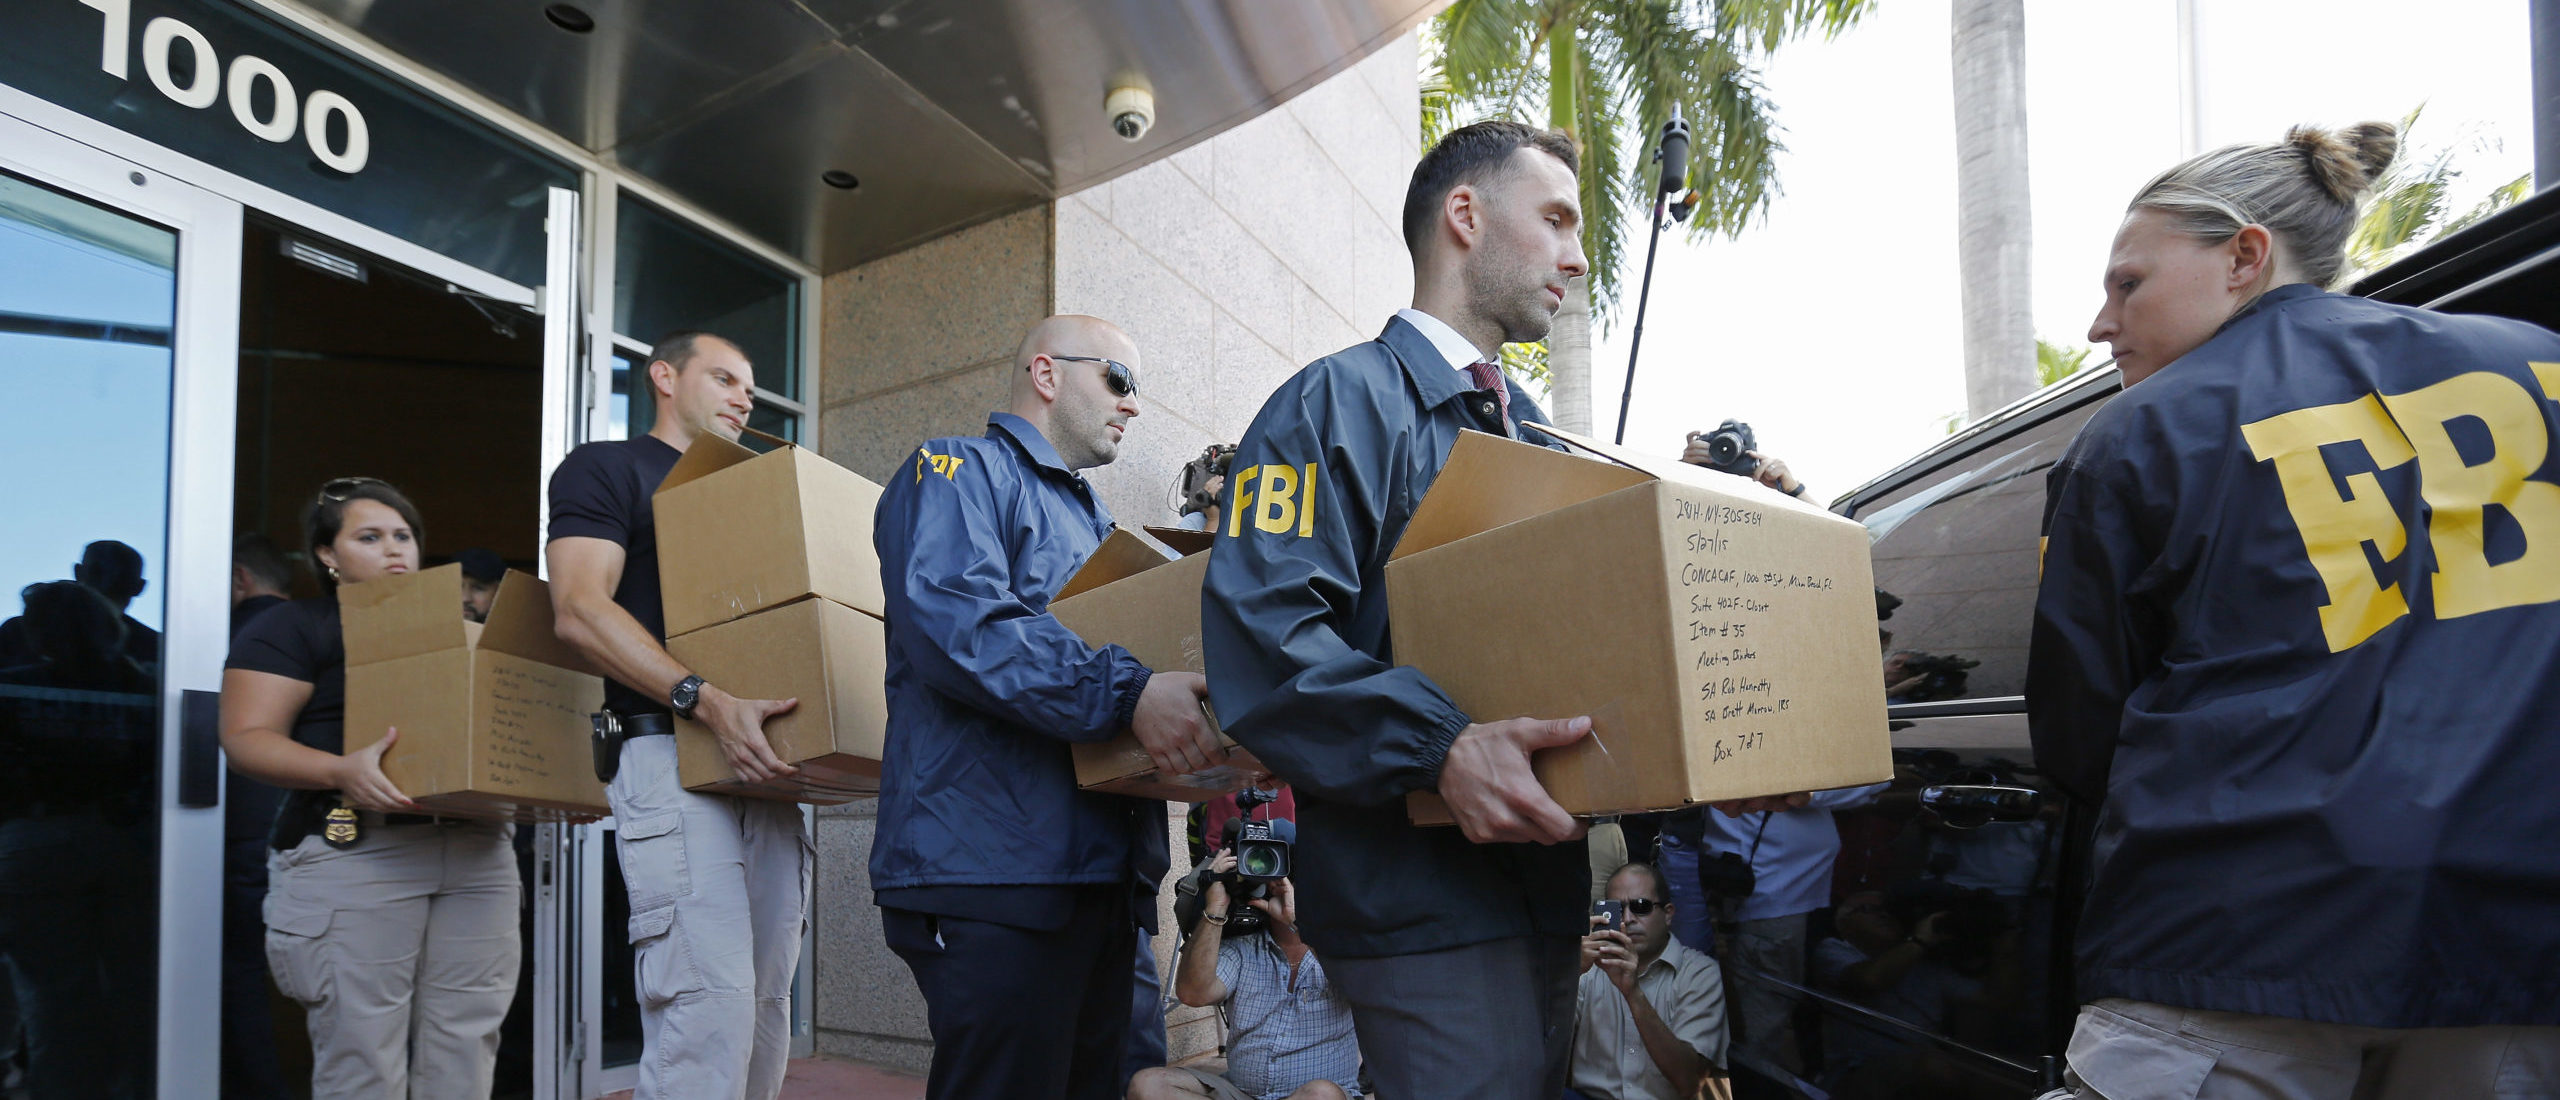 Hundreds Attempt To Get Their Money Back After Fbi Deposit Box Raid Fails To Produce Evidence Of